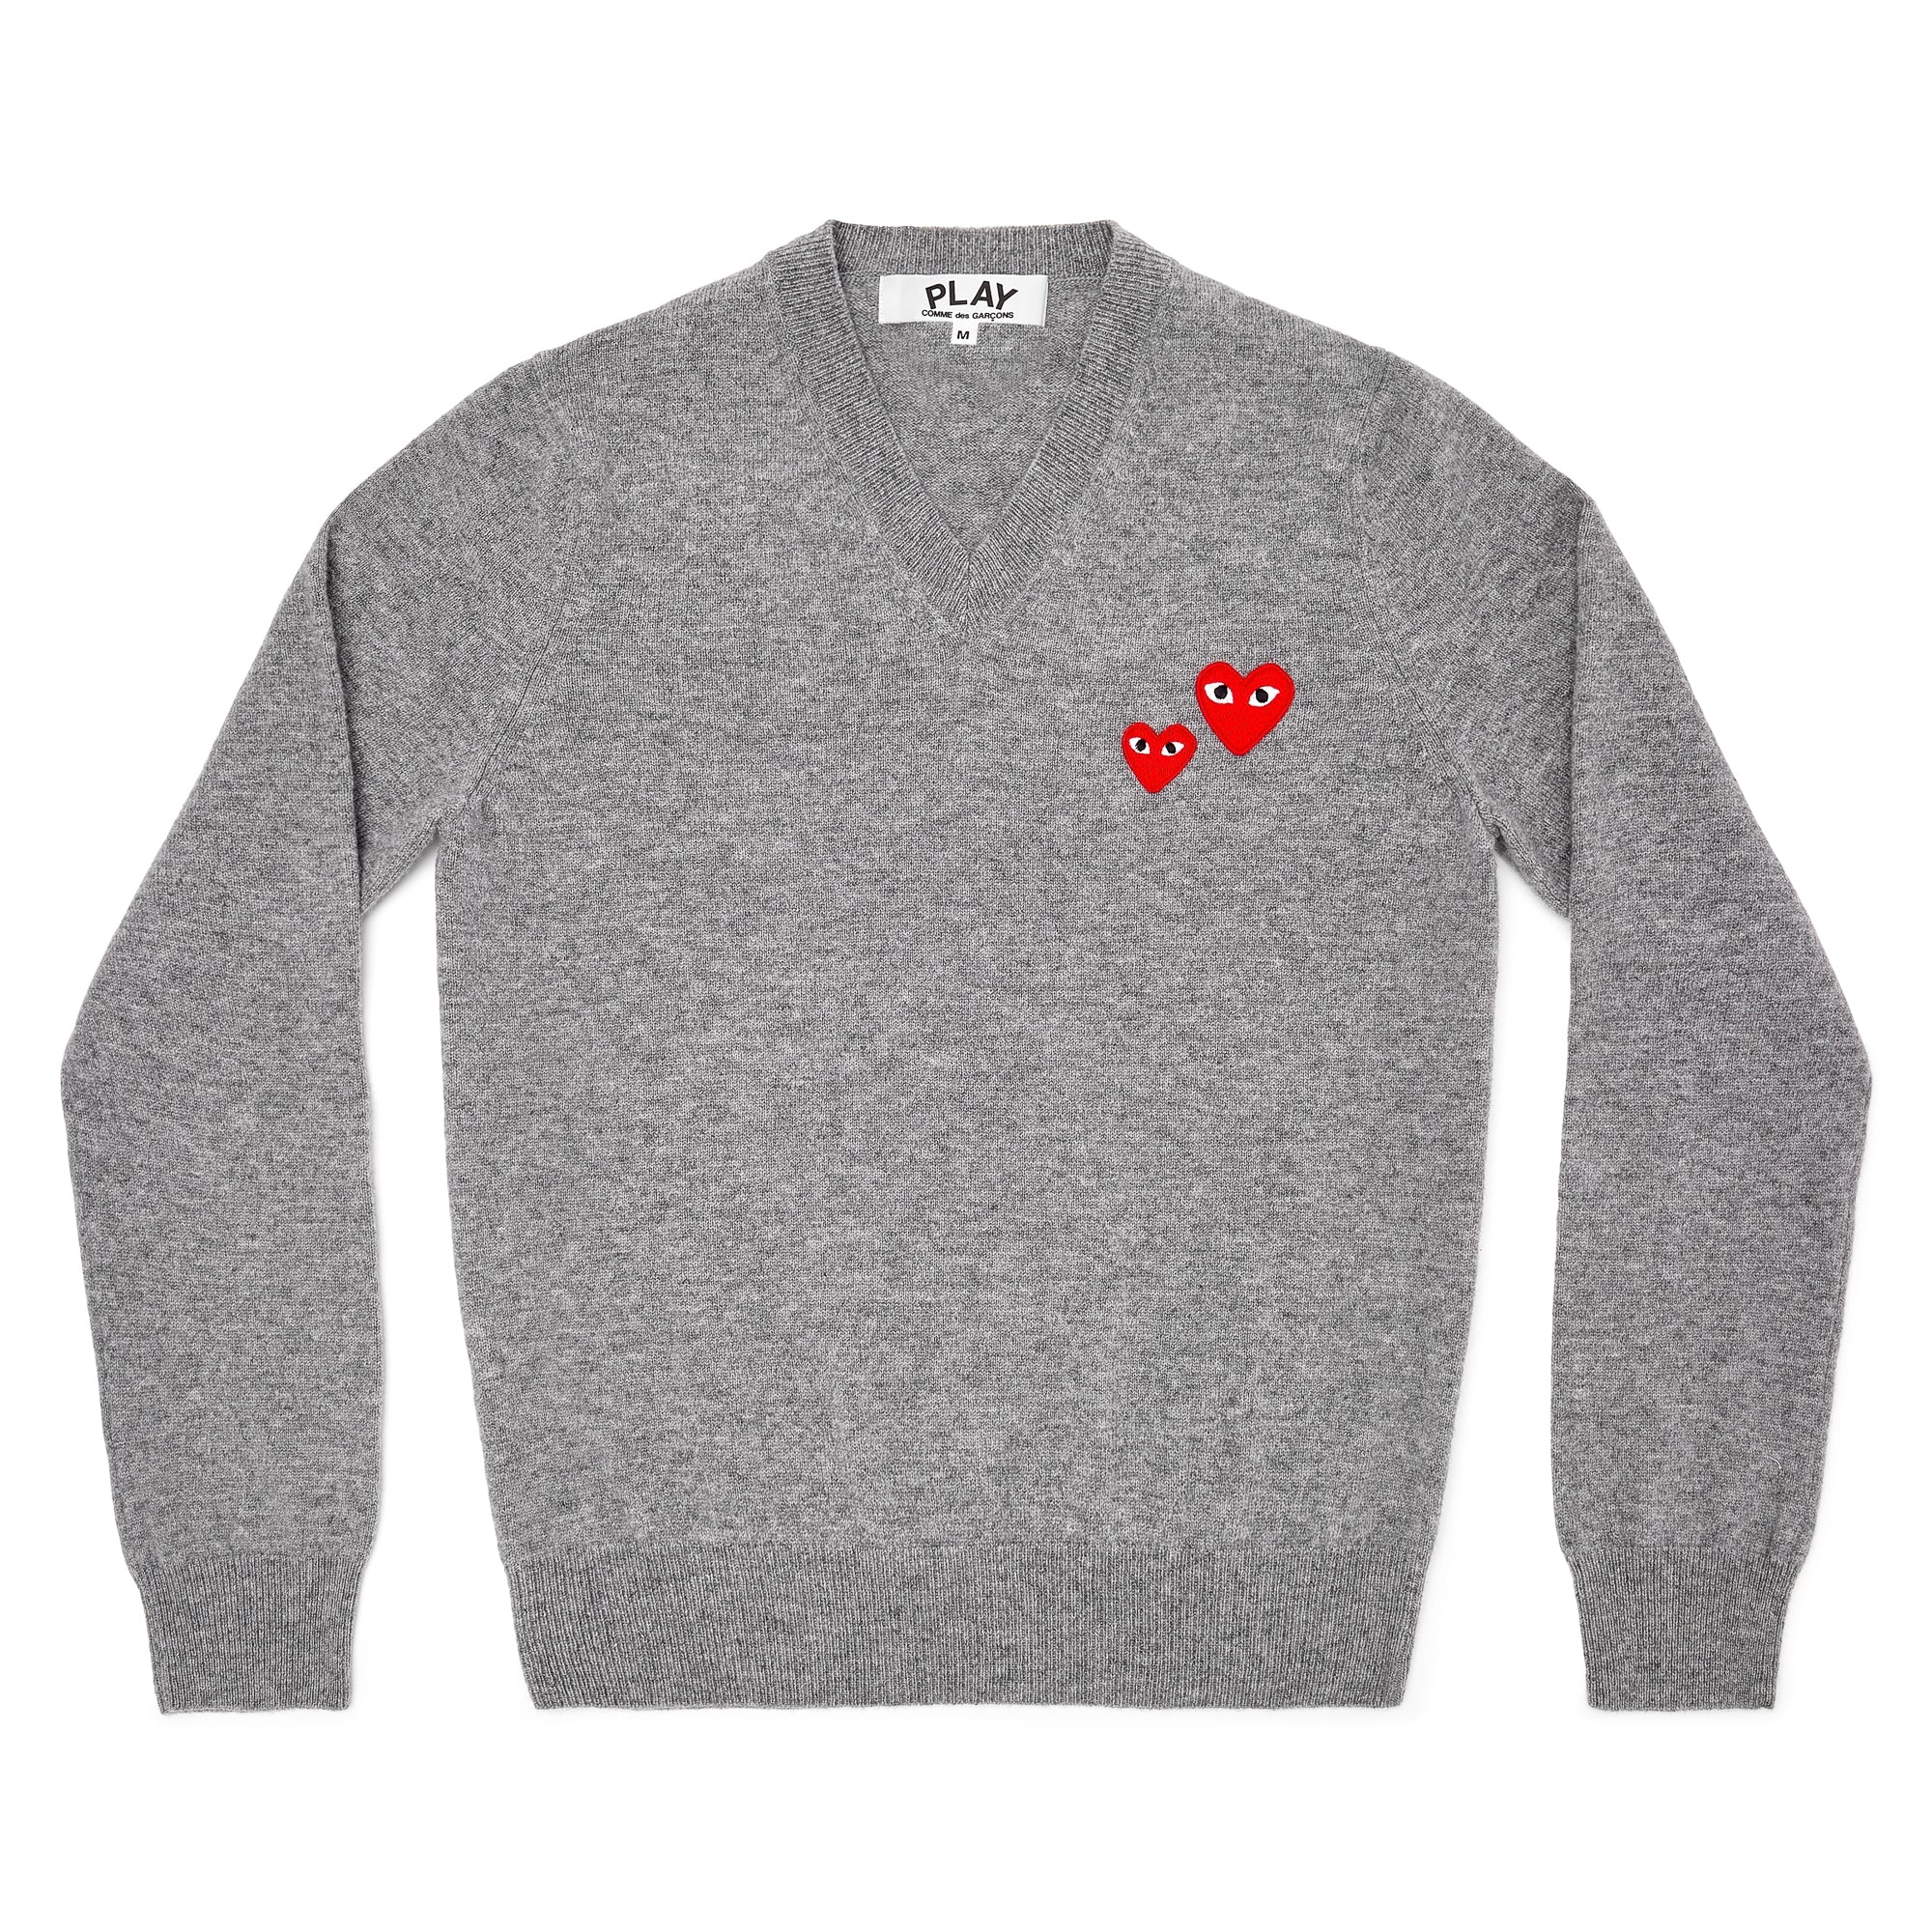 PLAY CDG - DOUBLE HEART JUMPER - (GREY) view 1